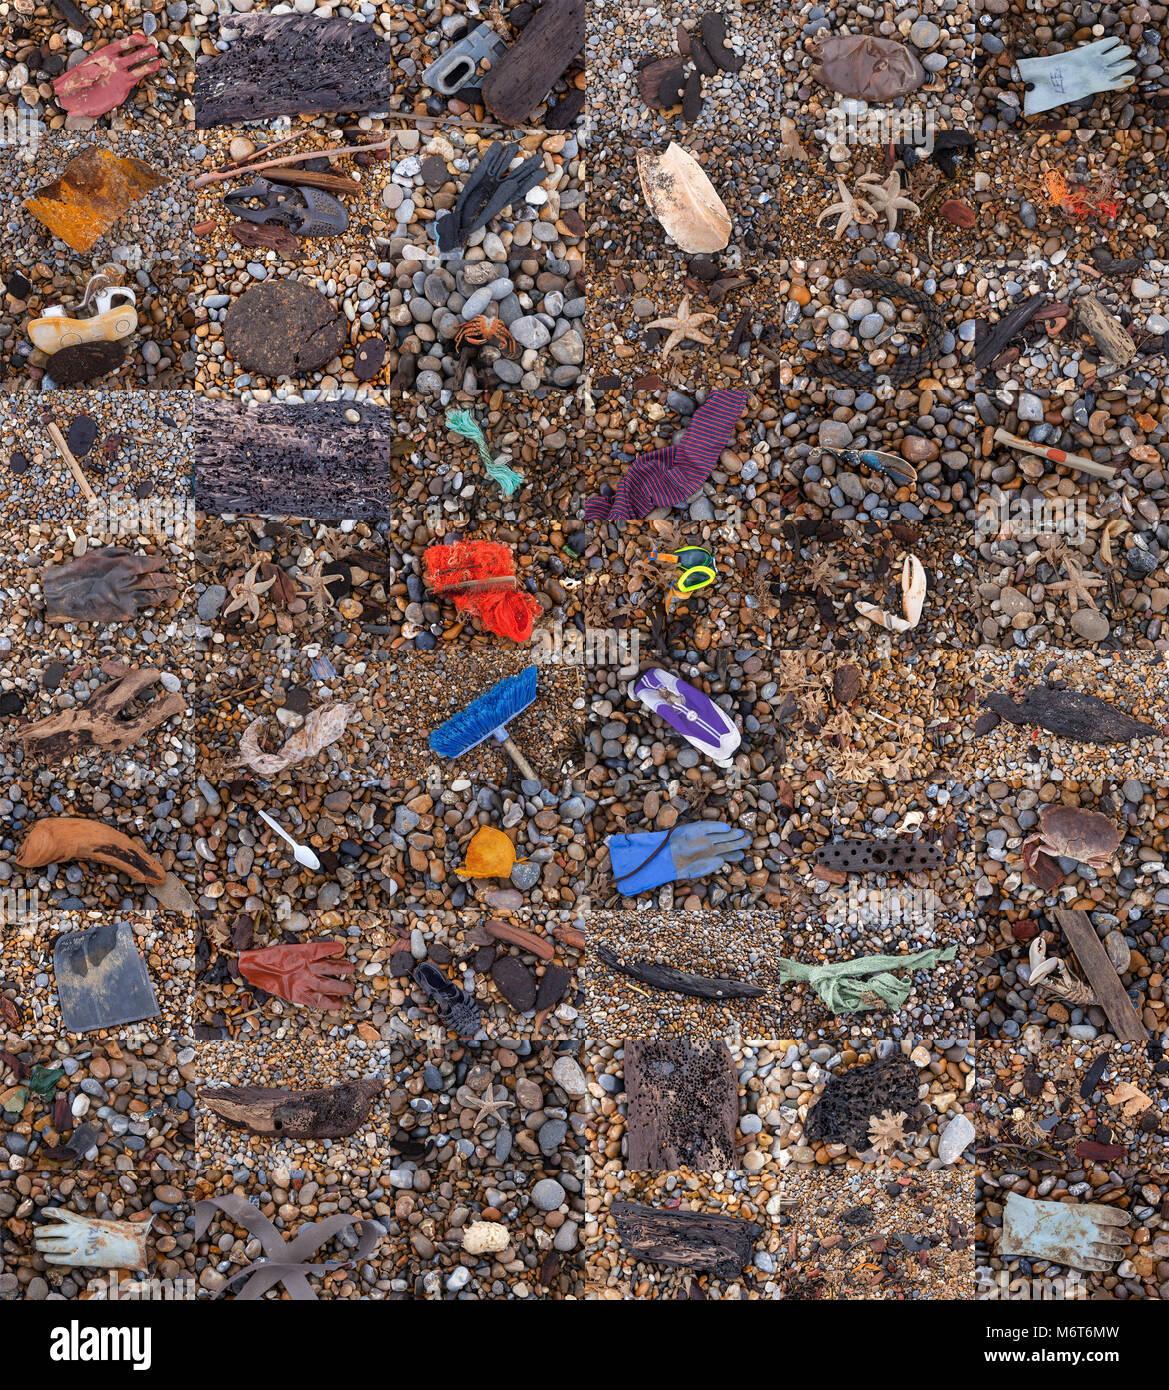 A montage of items washed up on a shingle beach after 'The Beast From The East' North Sea storm, Suffolk Coast, England Stock Photo